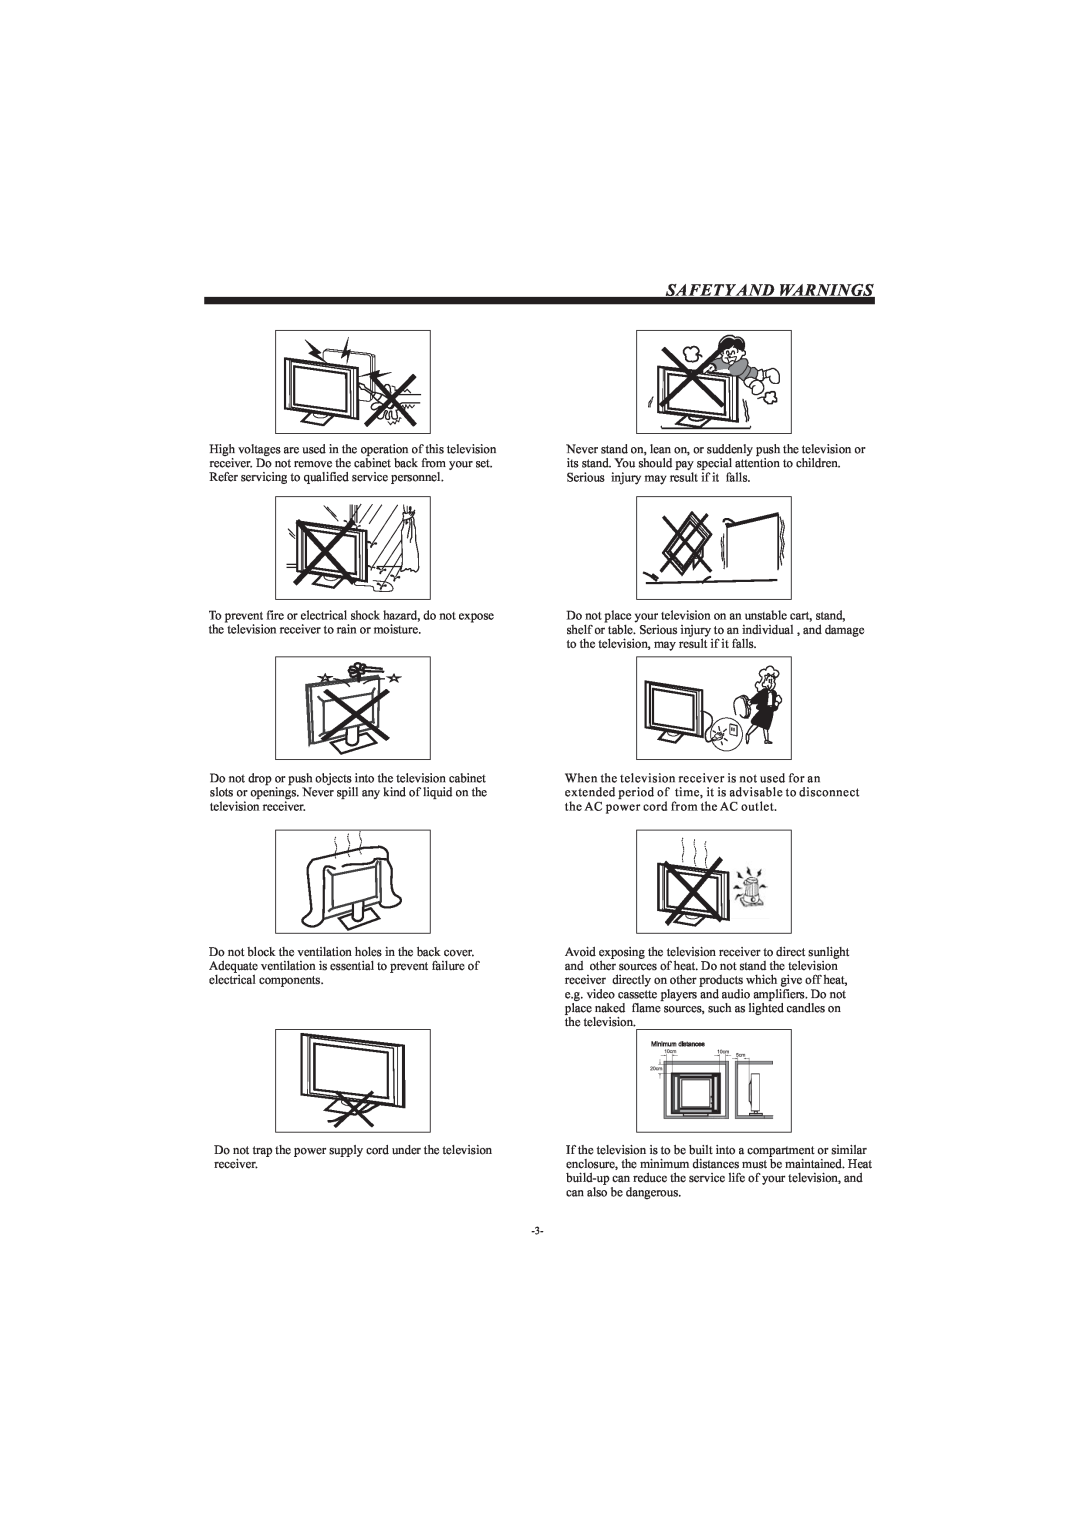 Haier LE24C430, LE22C430, LE19C430 Safety And Warnings, Do not trap the power supply cord under the television receiver 